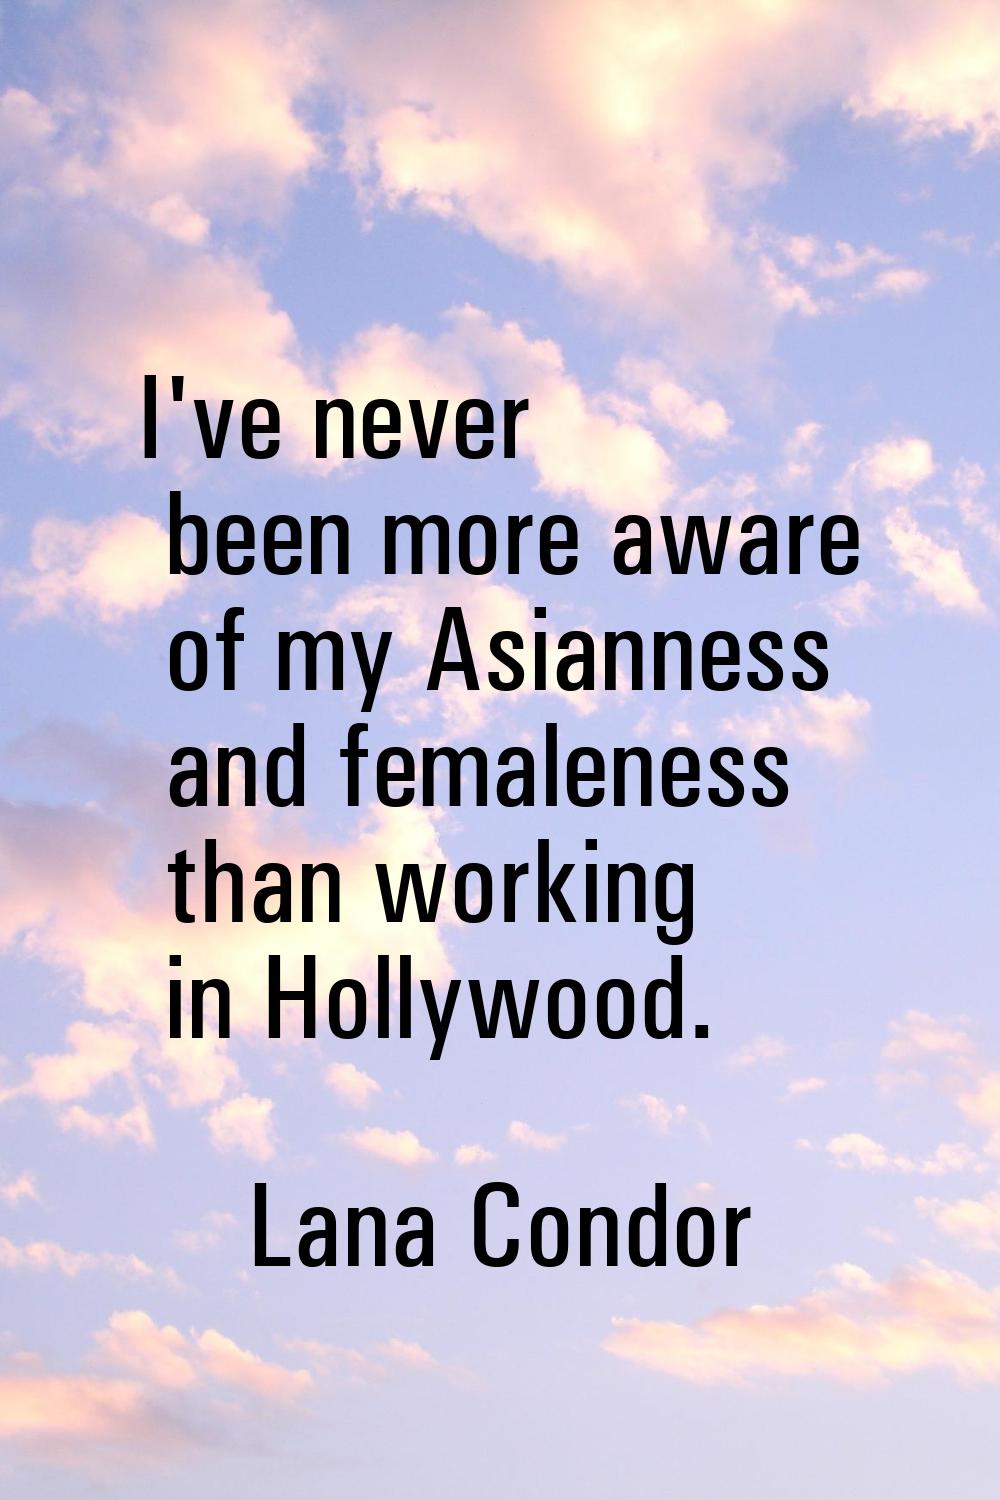 I've never been more aware of my Asianness and femaleness than working in Hollywood.